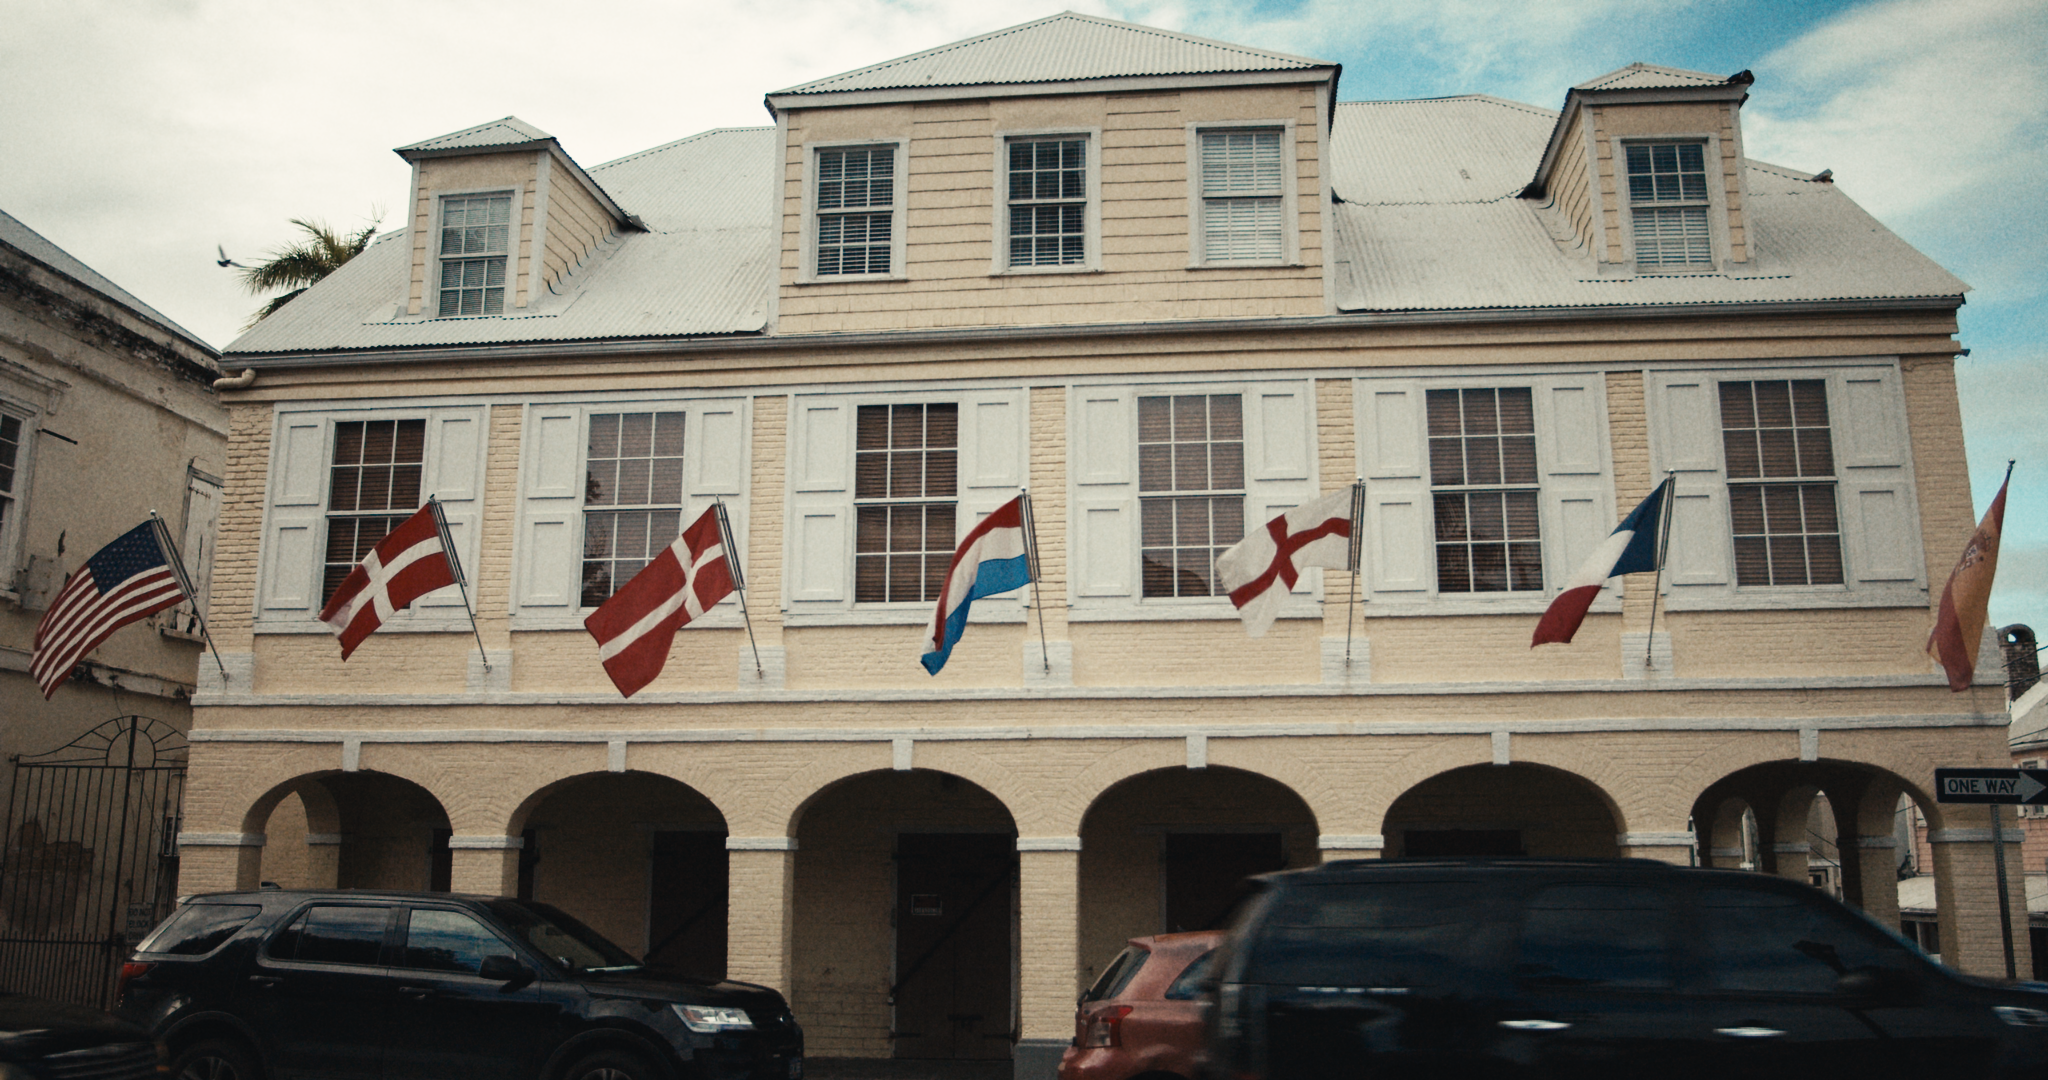 7 Flags of St. Croix